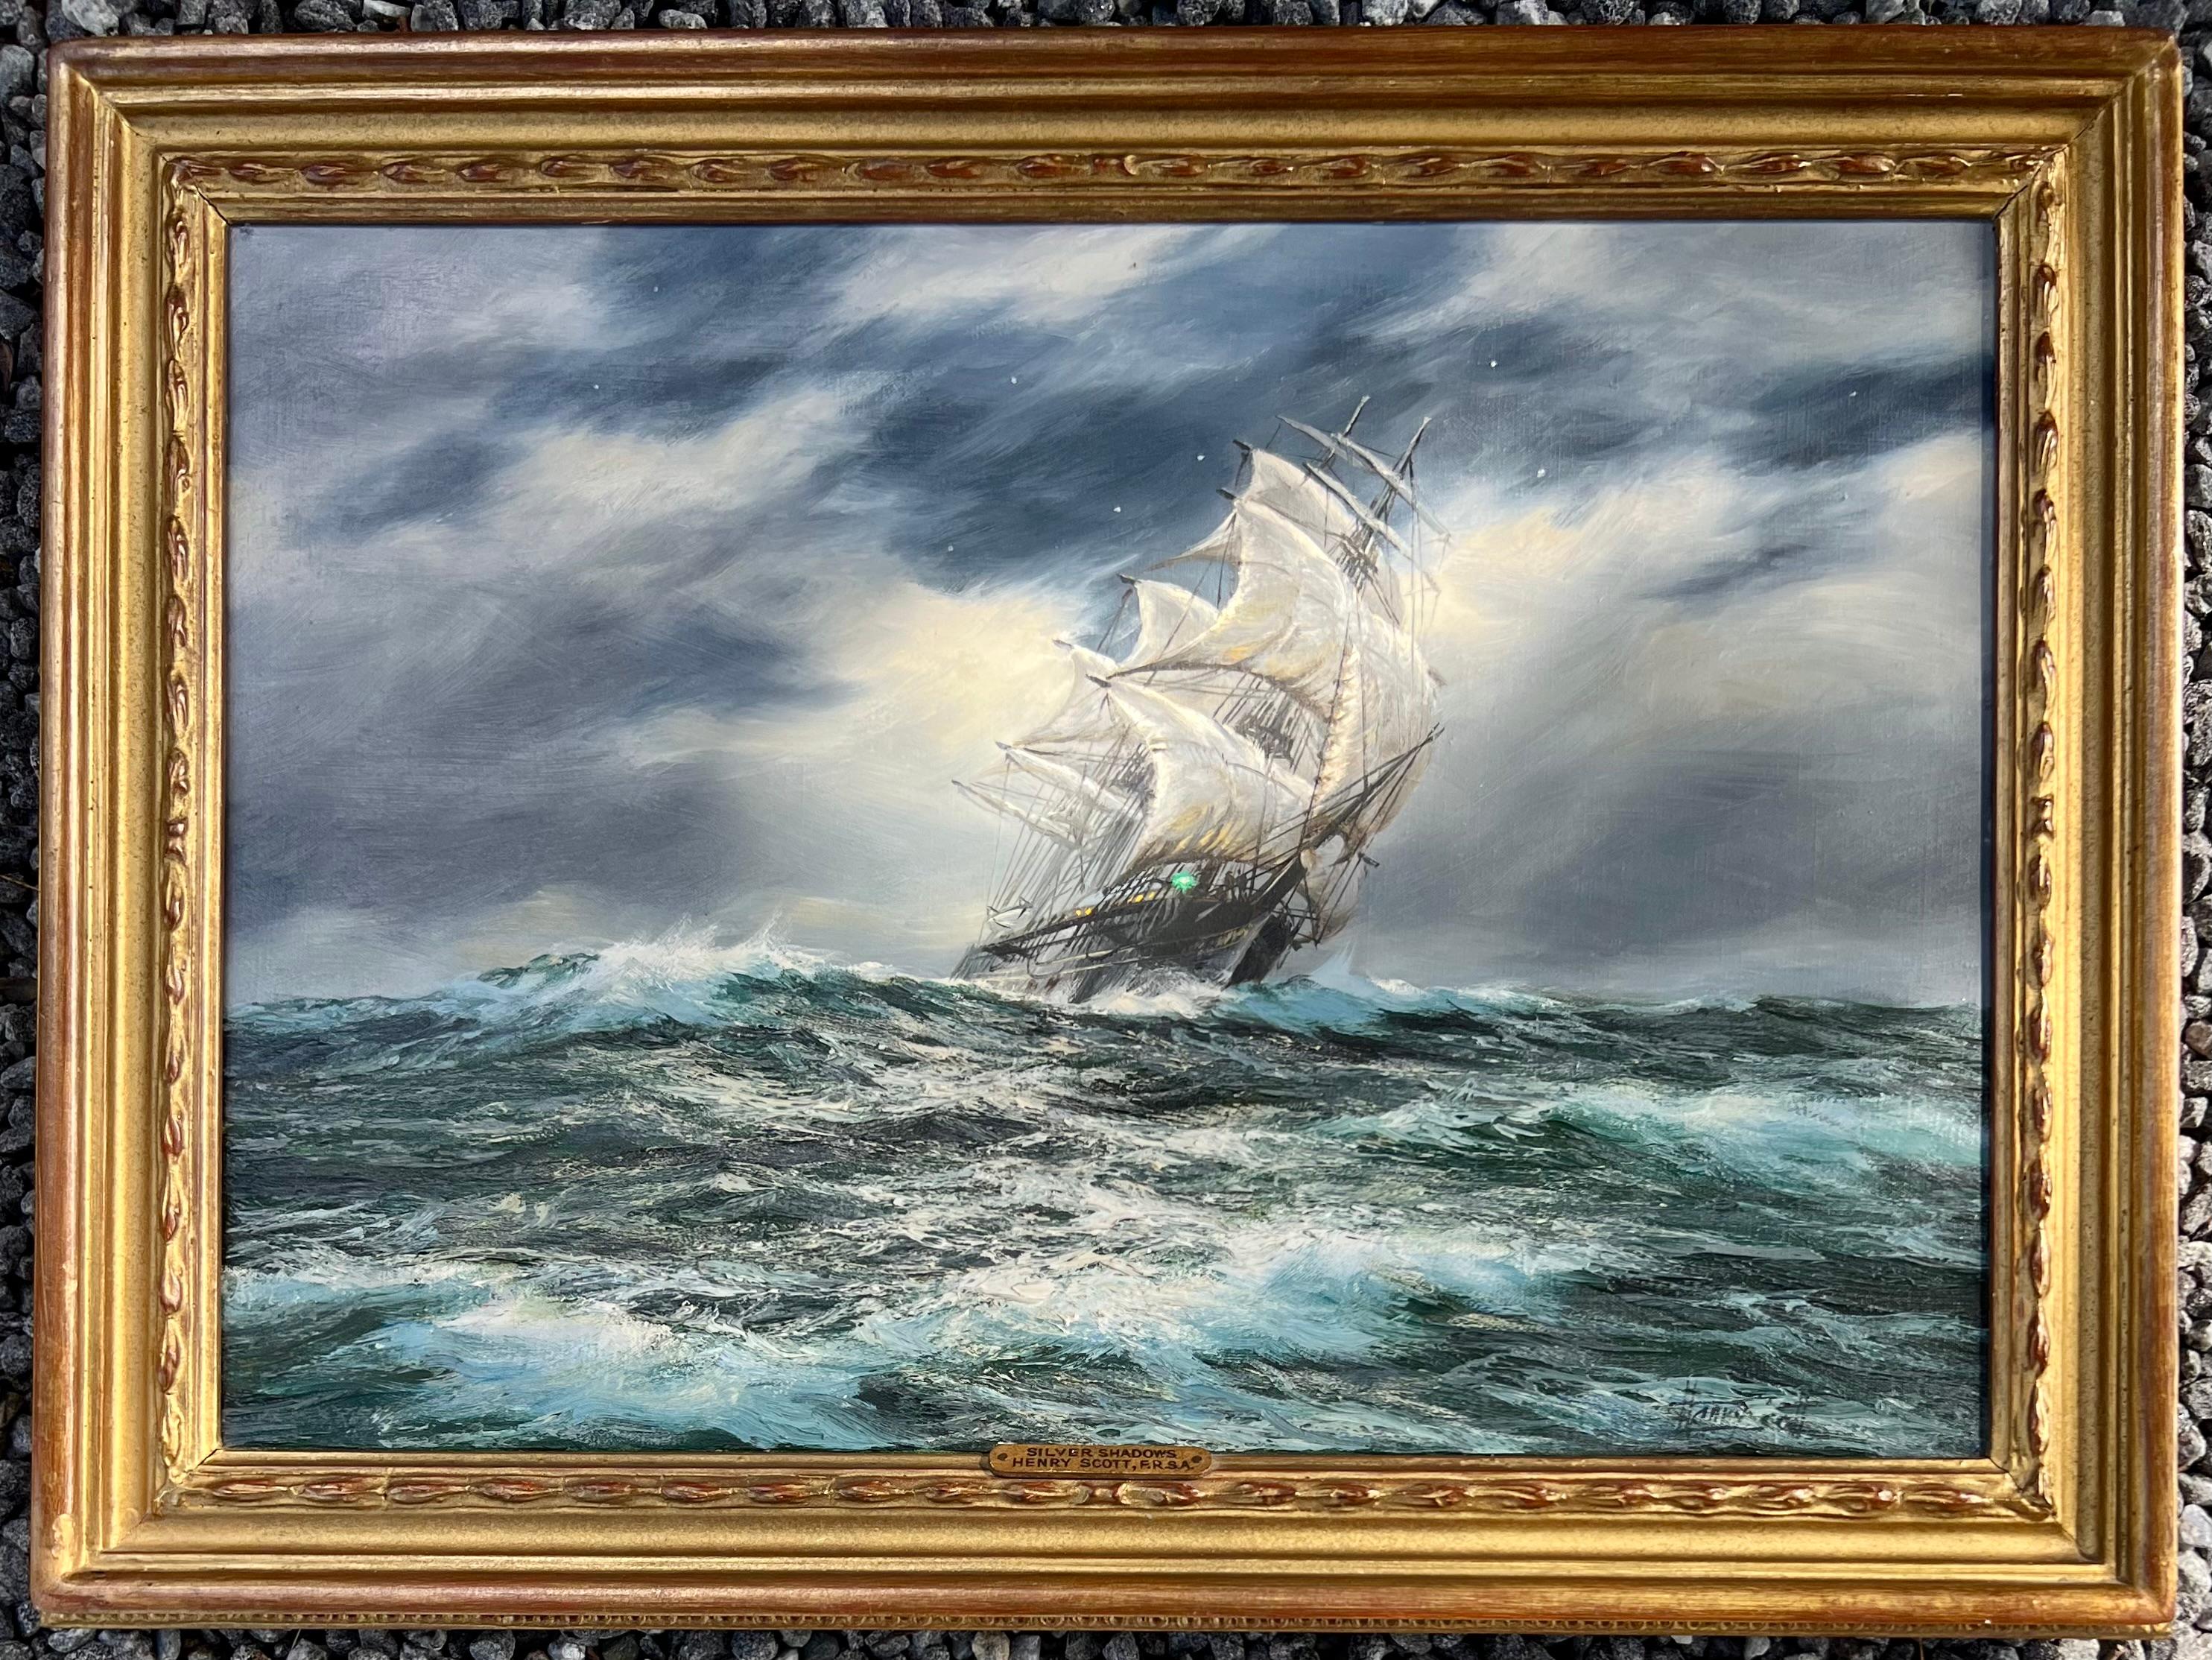 'Silver Shadows, The Famous Clipper Lightning' Oil on canvas, signed lower right. 

Provenance:  McConnal Mason, London  Quester Gallery, USA Private Collection, USA  Bradbury Art and Antiques, Wiscasset, ME USA  

Henry Scott was a painter of